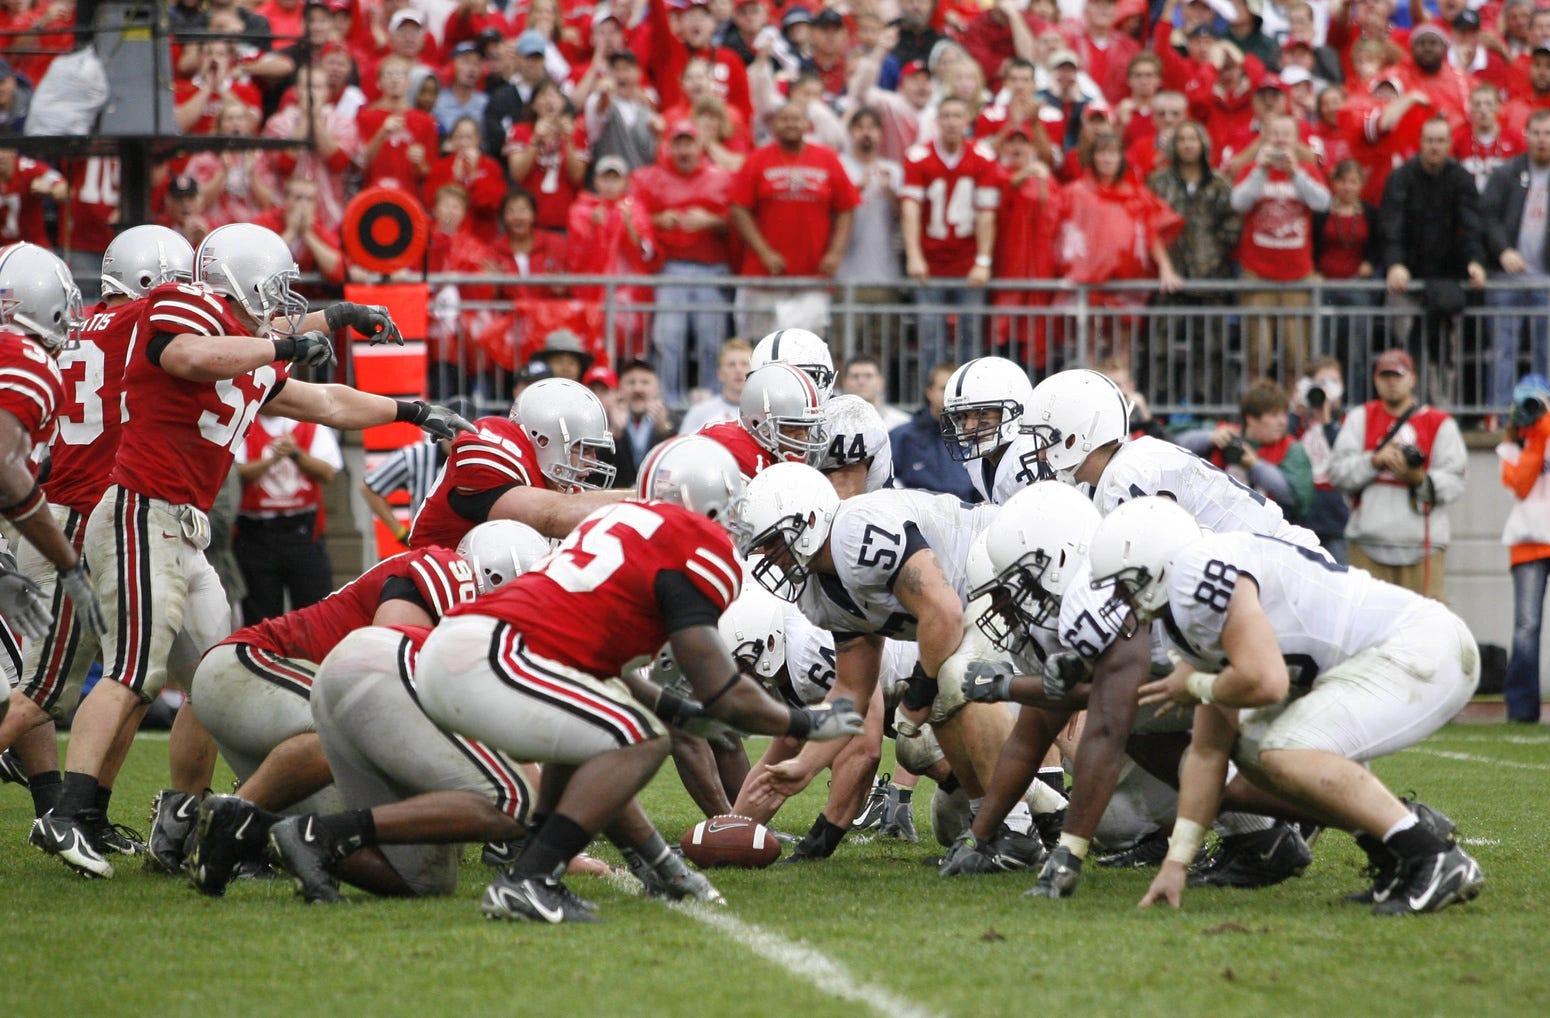 Sep 23, 2006; Columbus, OH, USA; Penn State Nittany Lions false starts at the goal line being forced to kick a field goal against Ohio State Buckeyes in the fourth quarter at Ohio Stadium. The Buckeyes beat the Nittany Lions 27-6. Mandatory Credit: Matthew Emmons-USA TODAY Sports © copyright Matthew Emmonspitt end